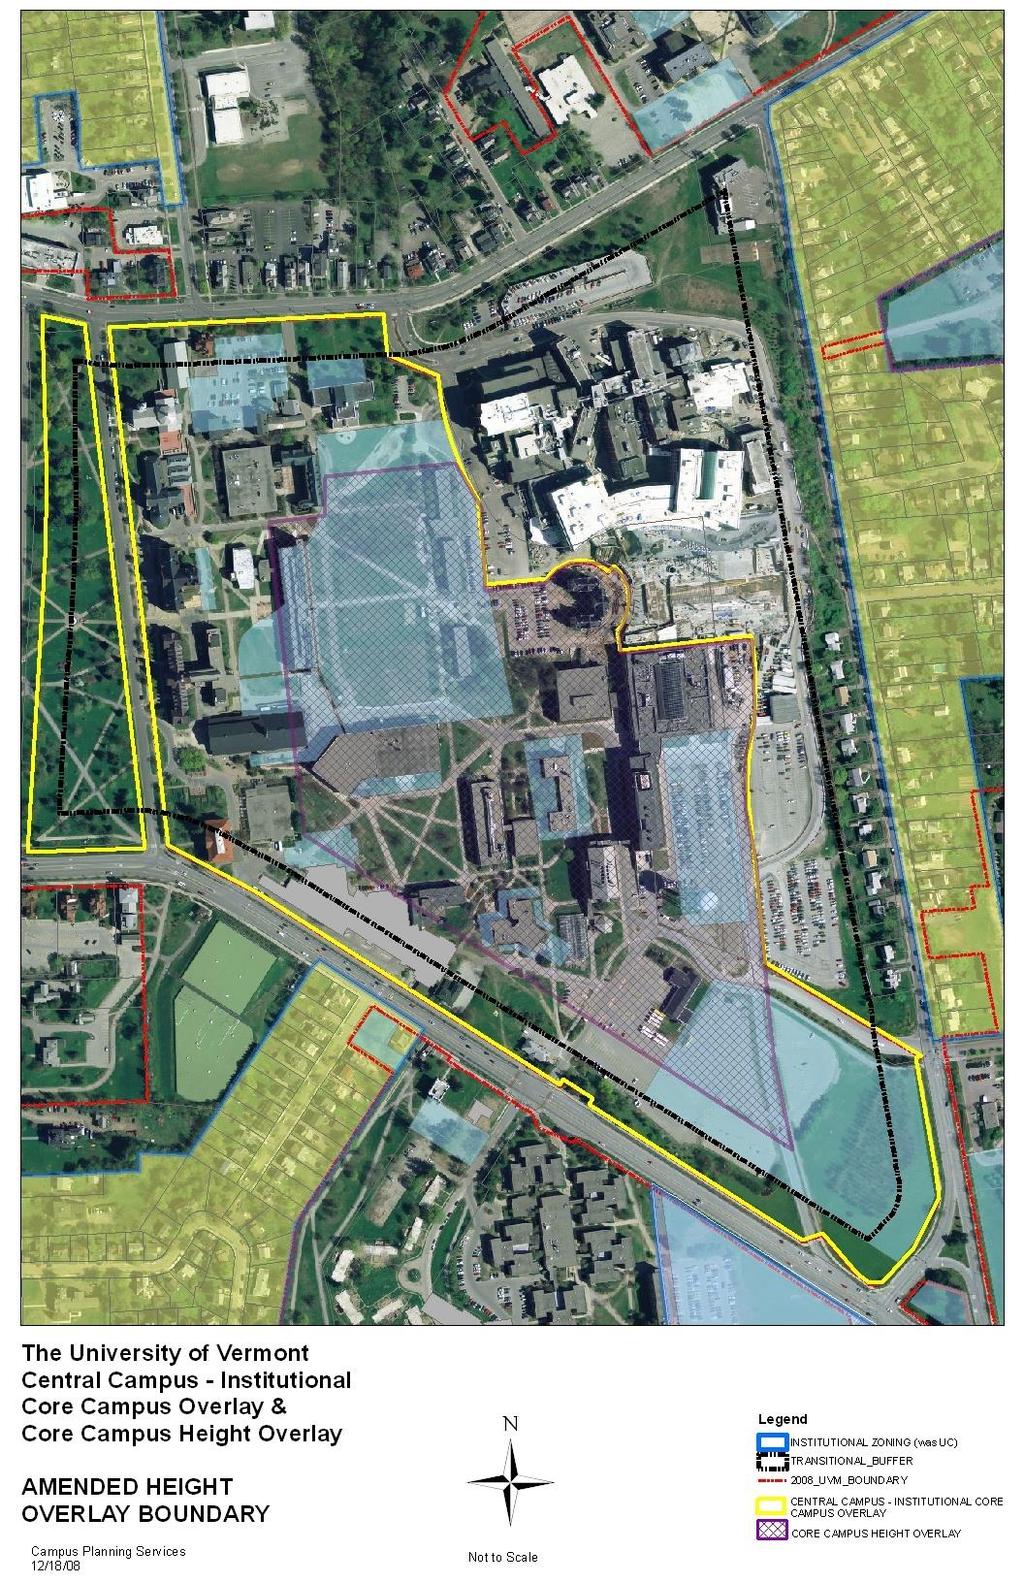 City of Burlington Zoning Central Campus Institutional Core Campus Overlay Zoning District: Institutional (I) & Institutional Core Campus Overlay (ICC): Lot Coverage: Allows up to 70% lot coverage